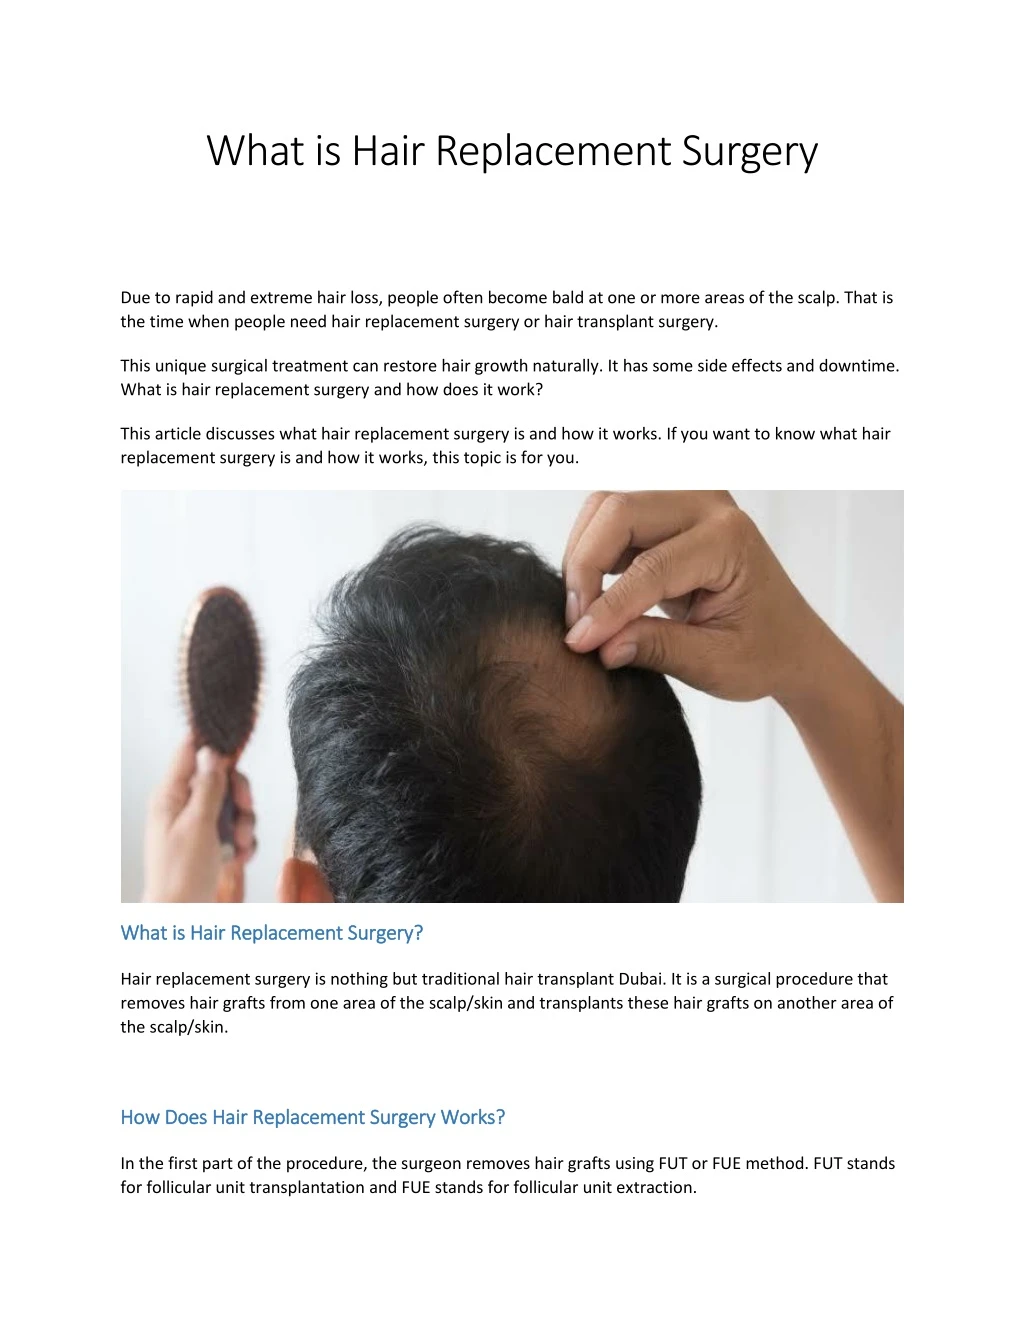 what is hair replacement surgery